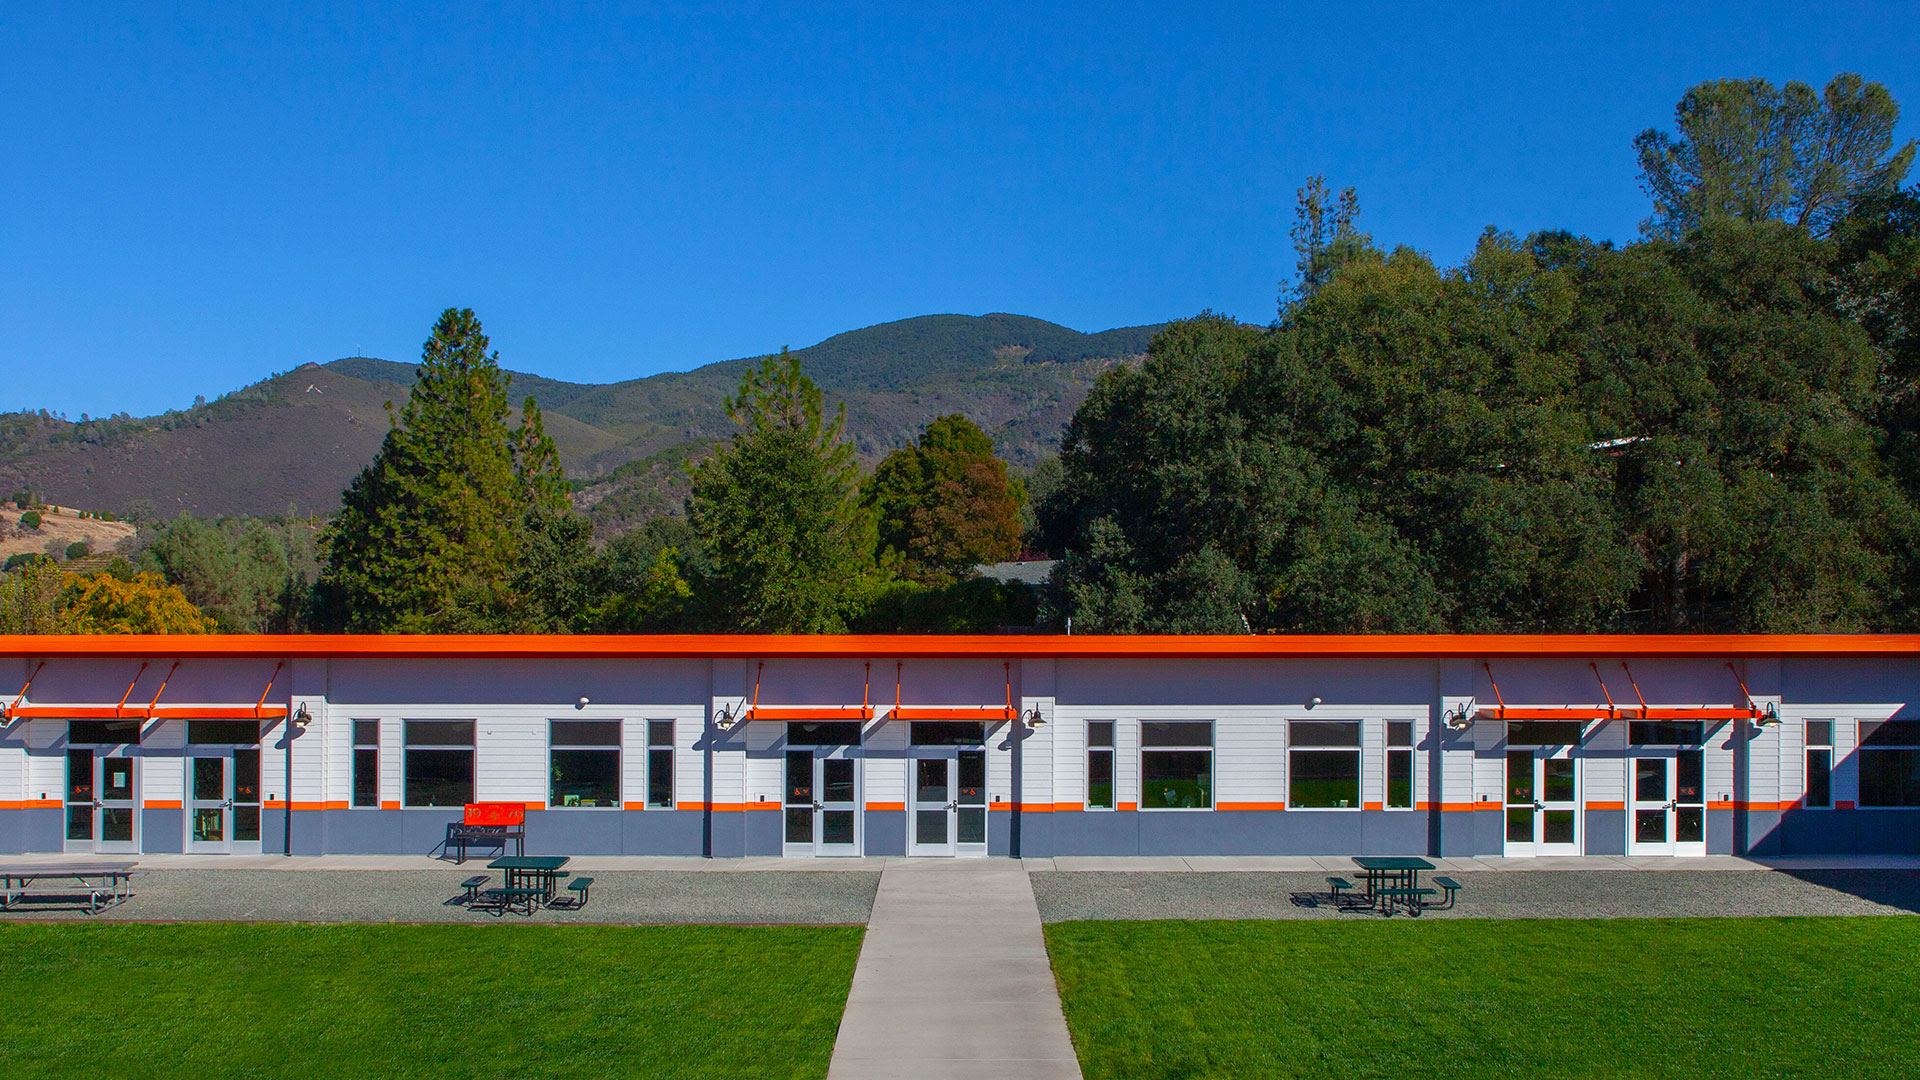 Wide shot of modular classroom wing. White walls with gray wainscot, orange trim and details. Mountains and grass around